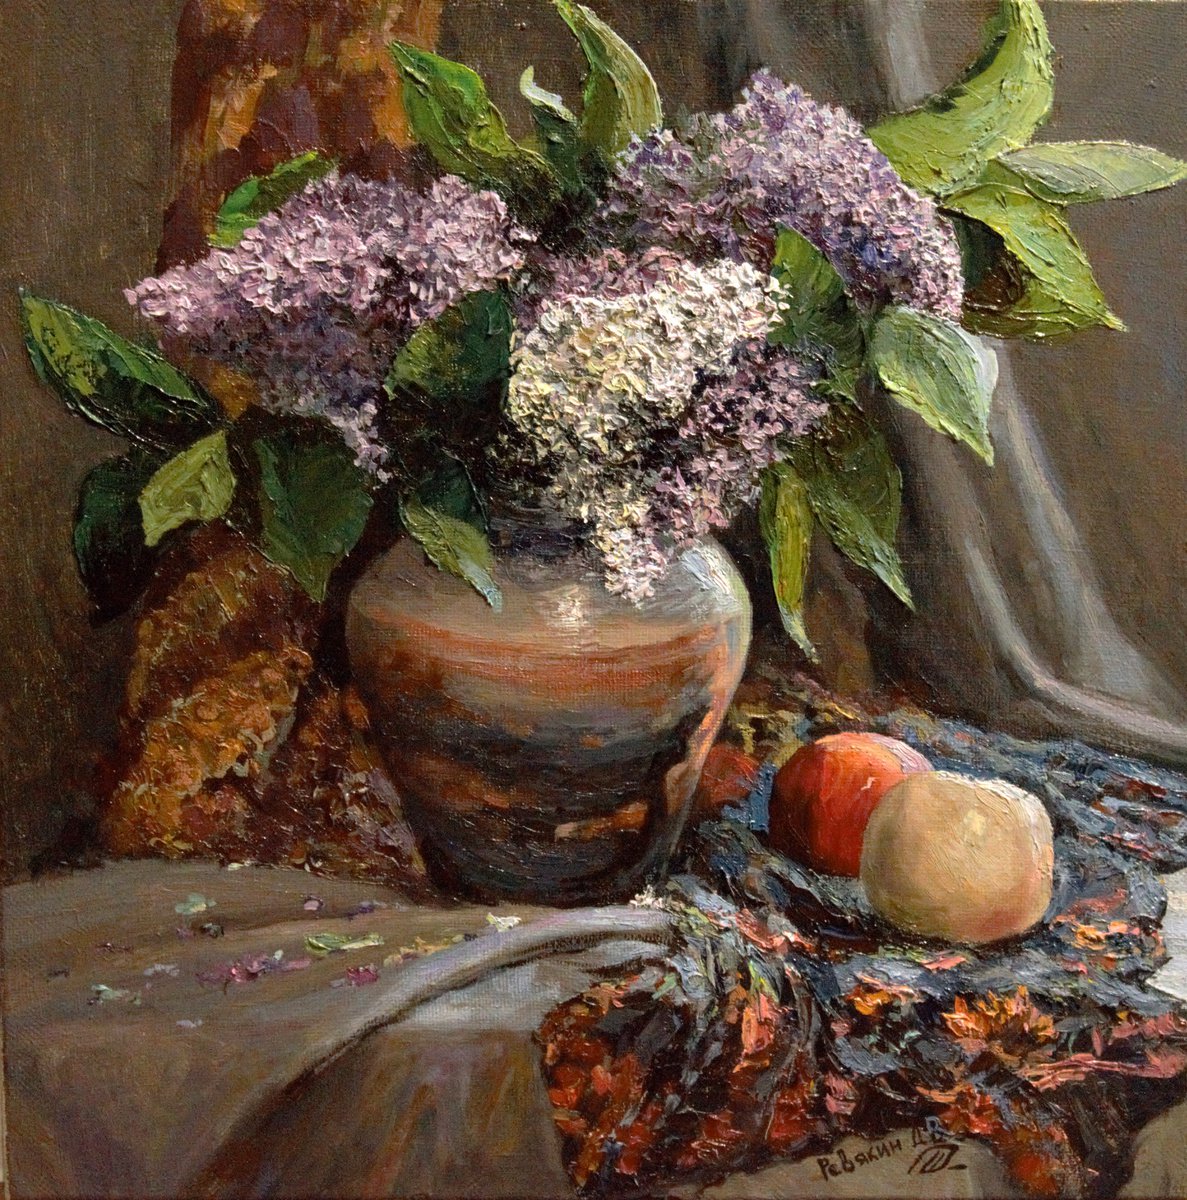 Lilac bouquet in a clay vase. Collection oil painting by Dmitry Revyakin